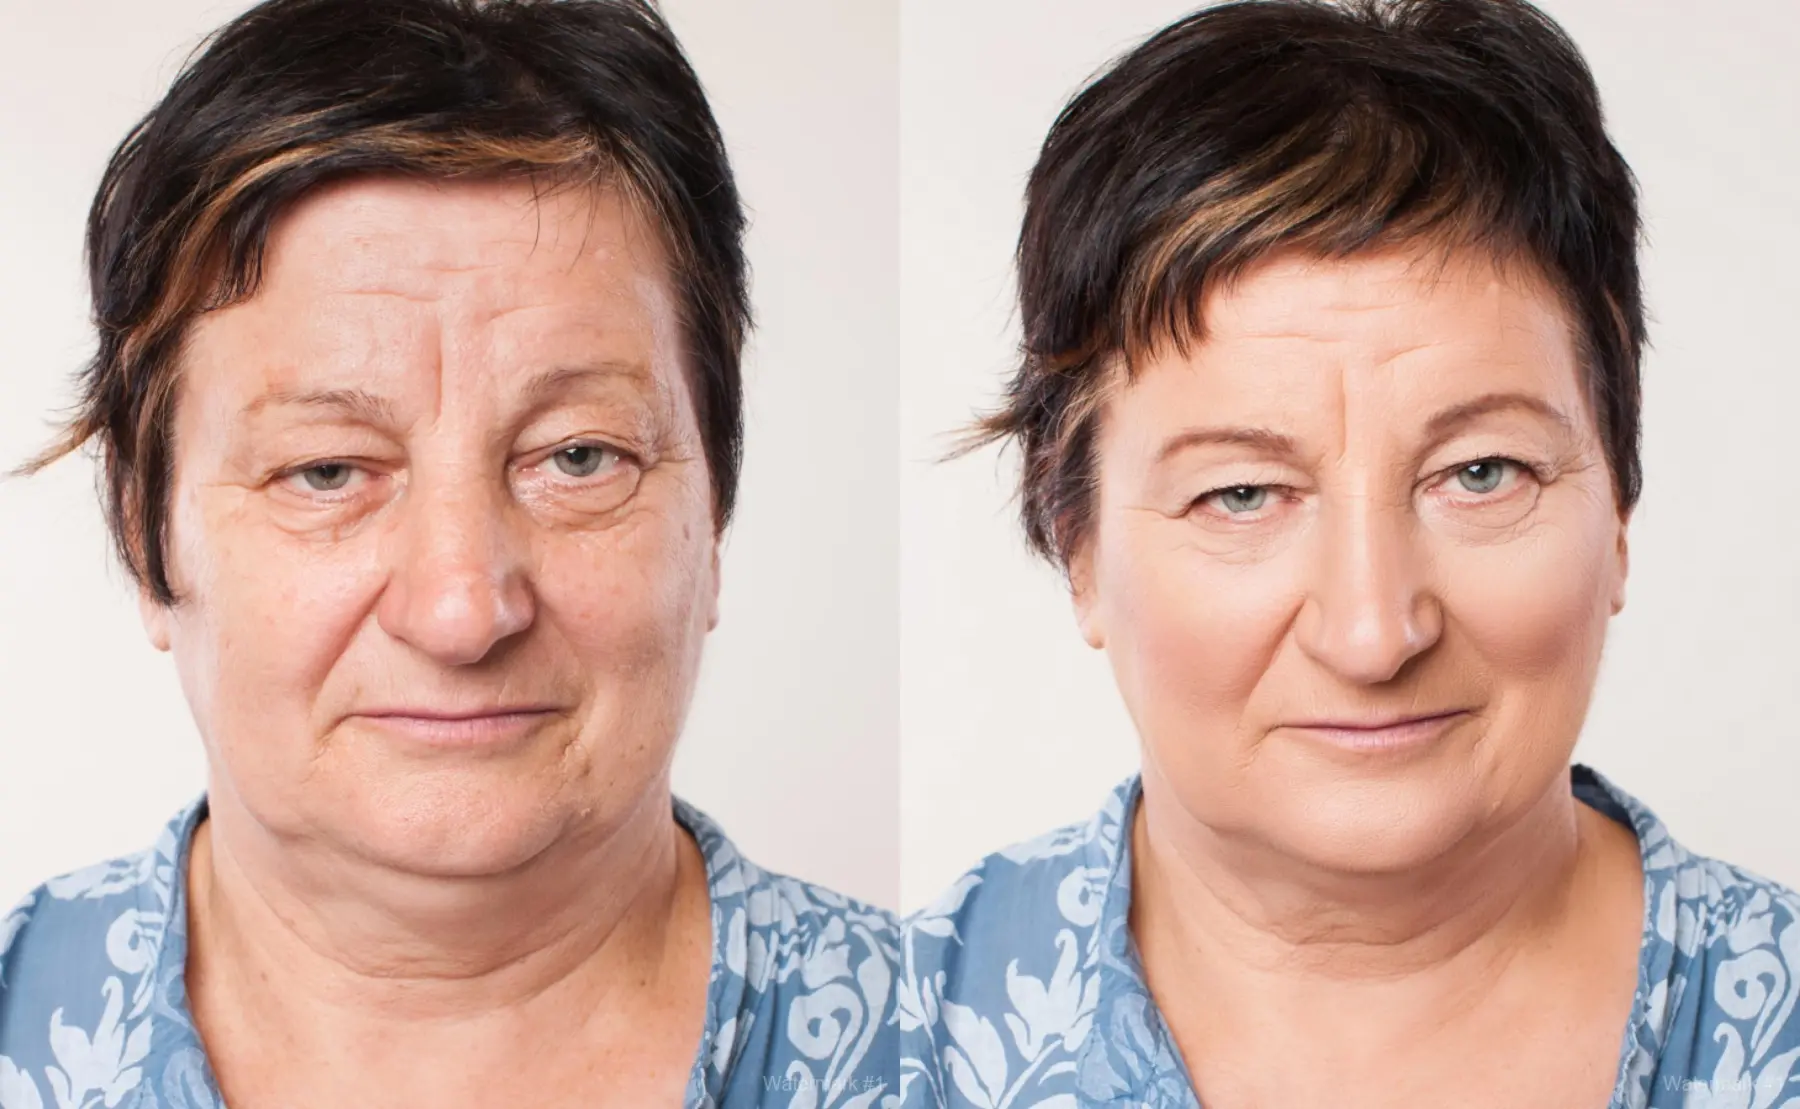 Facelift: Patient 1 - Before and After 5